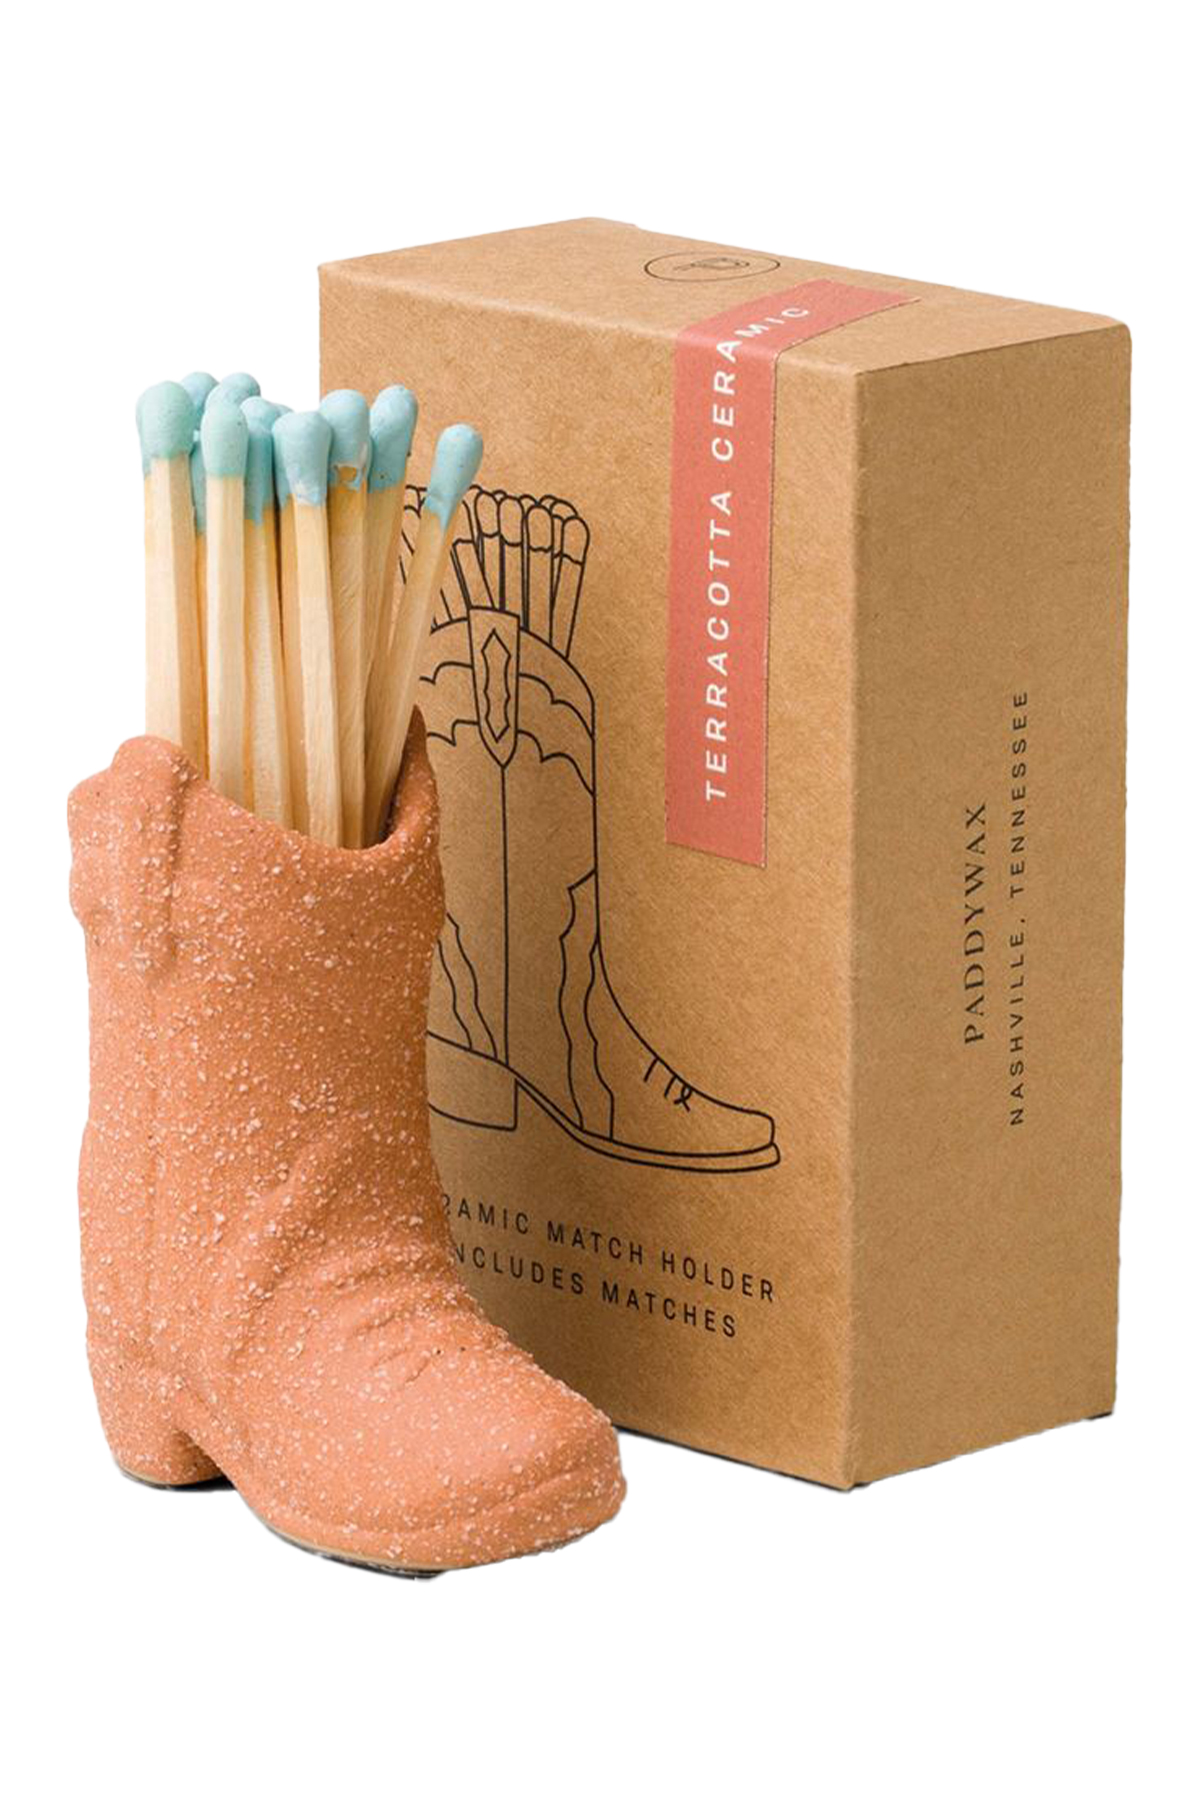 terracotta ceramics boot with matches from urban owl